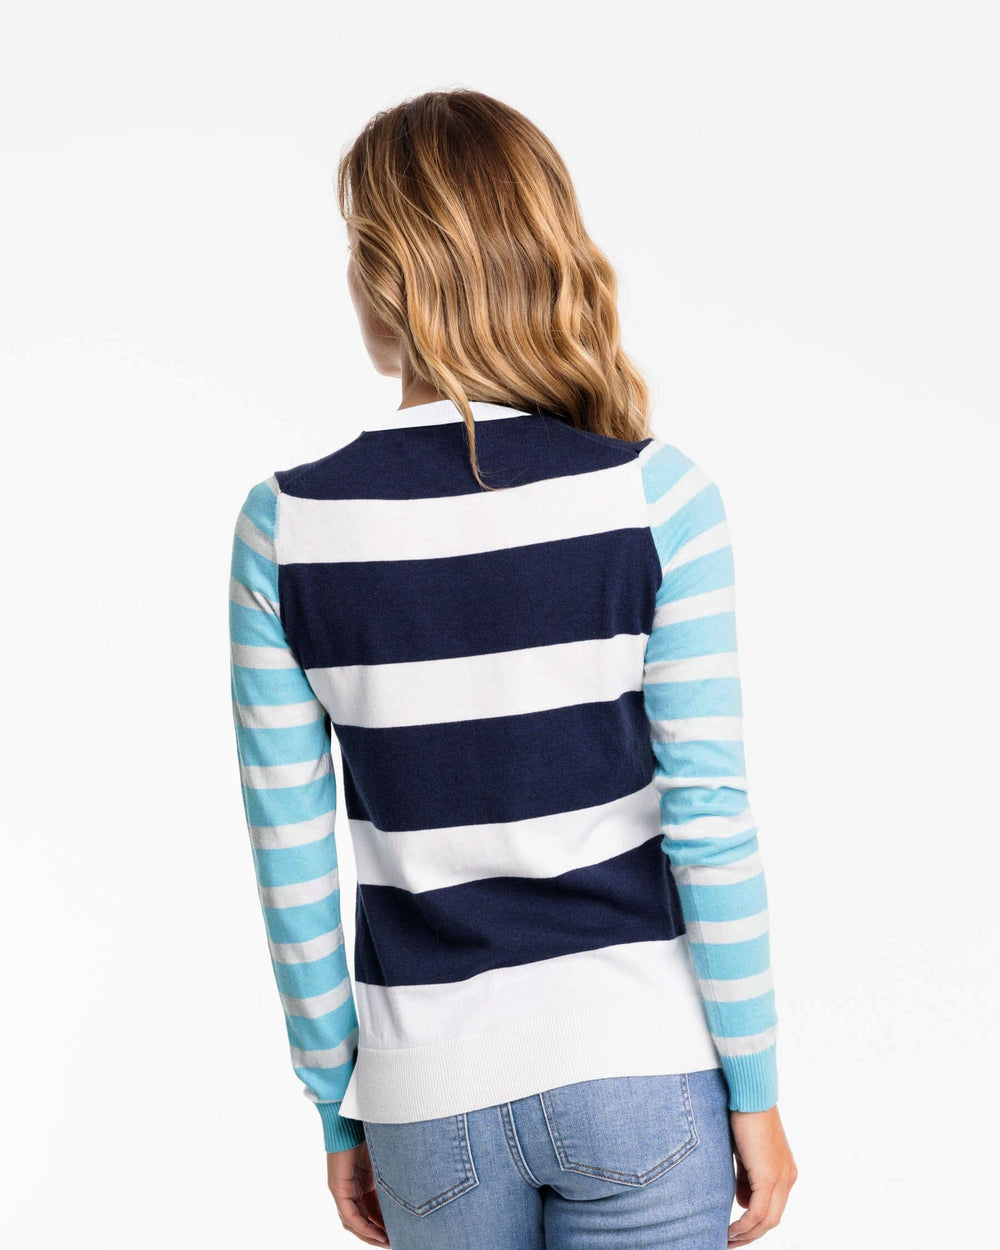 The back view of the Rugby Stripe Fireside Sweater by Southern Tide - True Navy